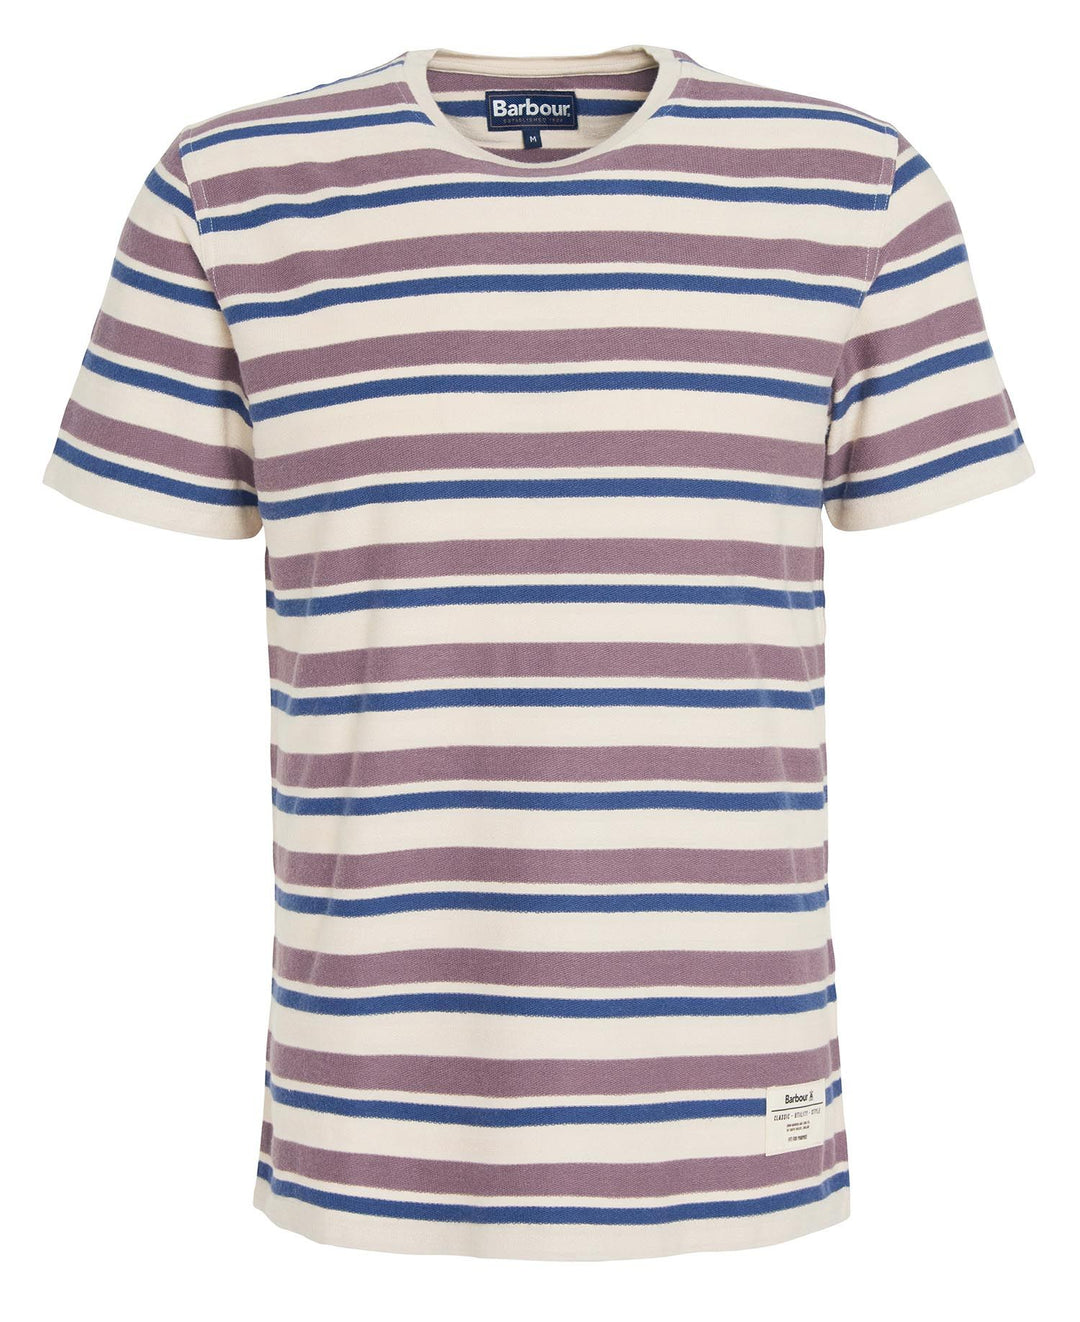 Barbour Whitwell Striped T-Shirt/Majica